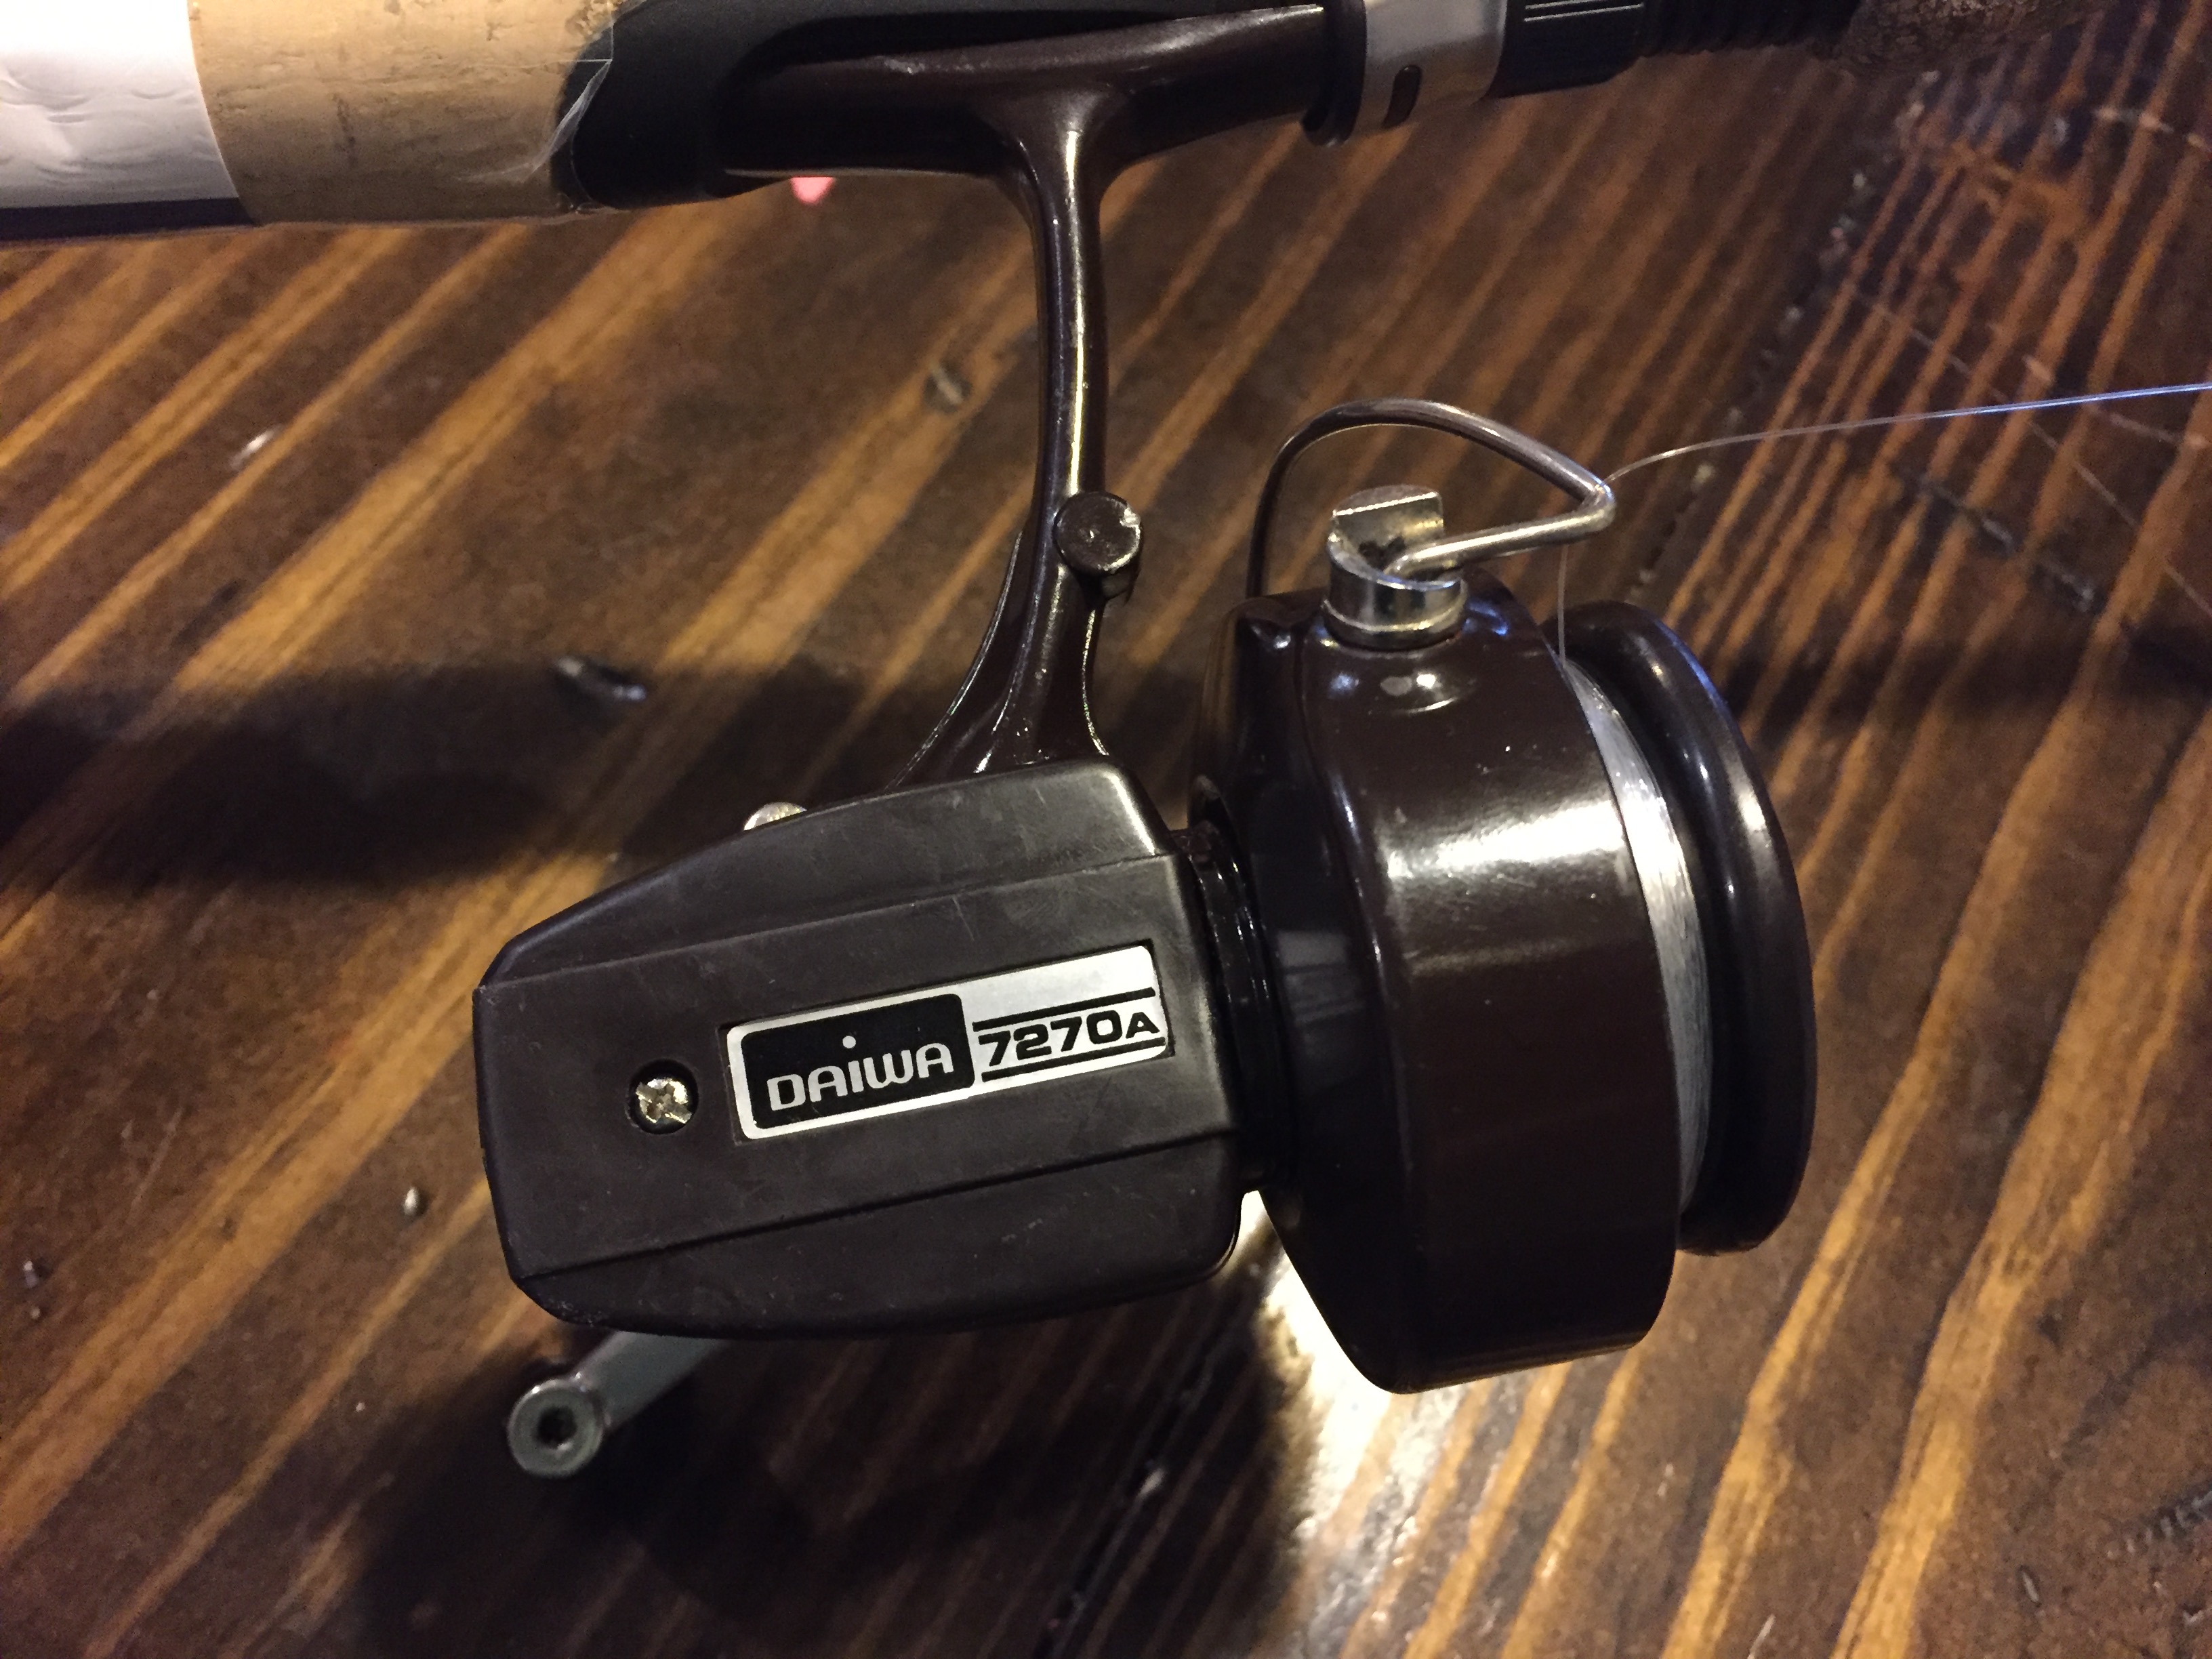 Daiwa 7270A for my daughter.